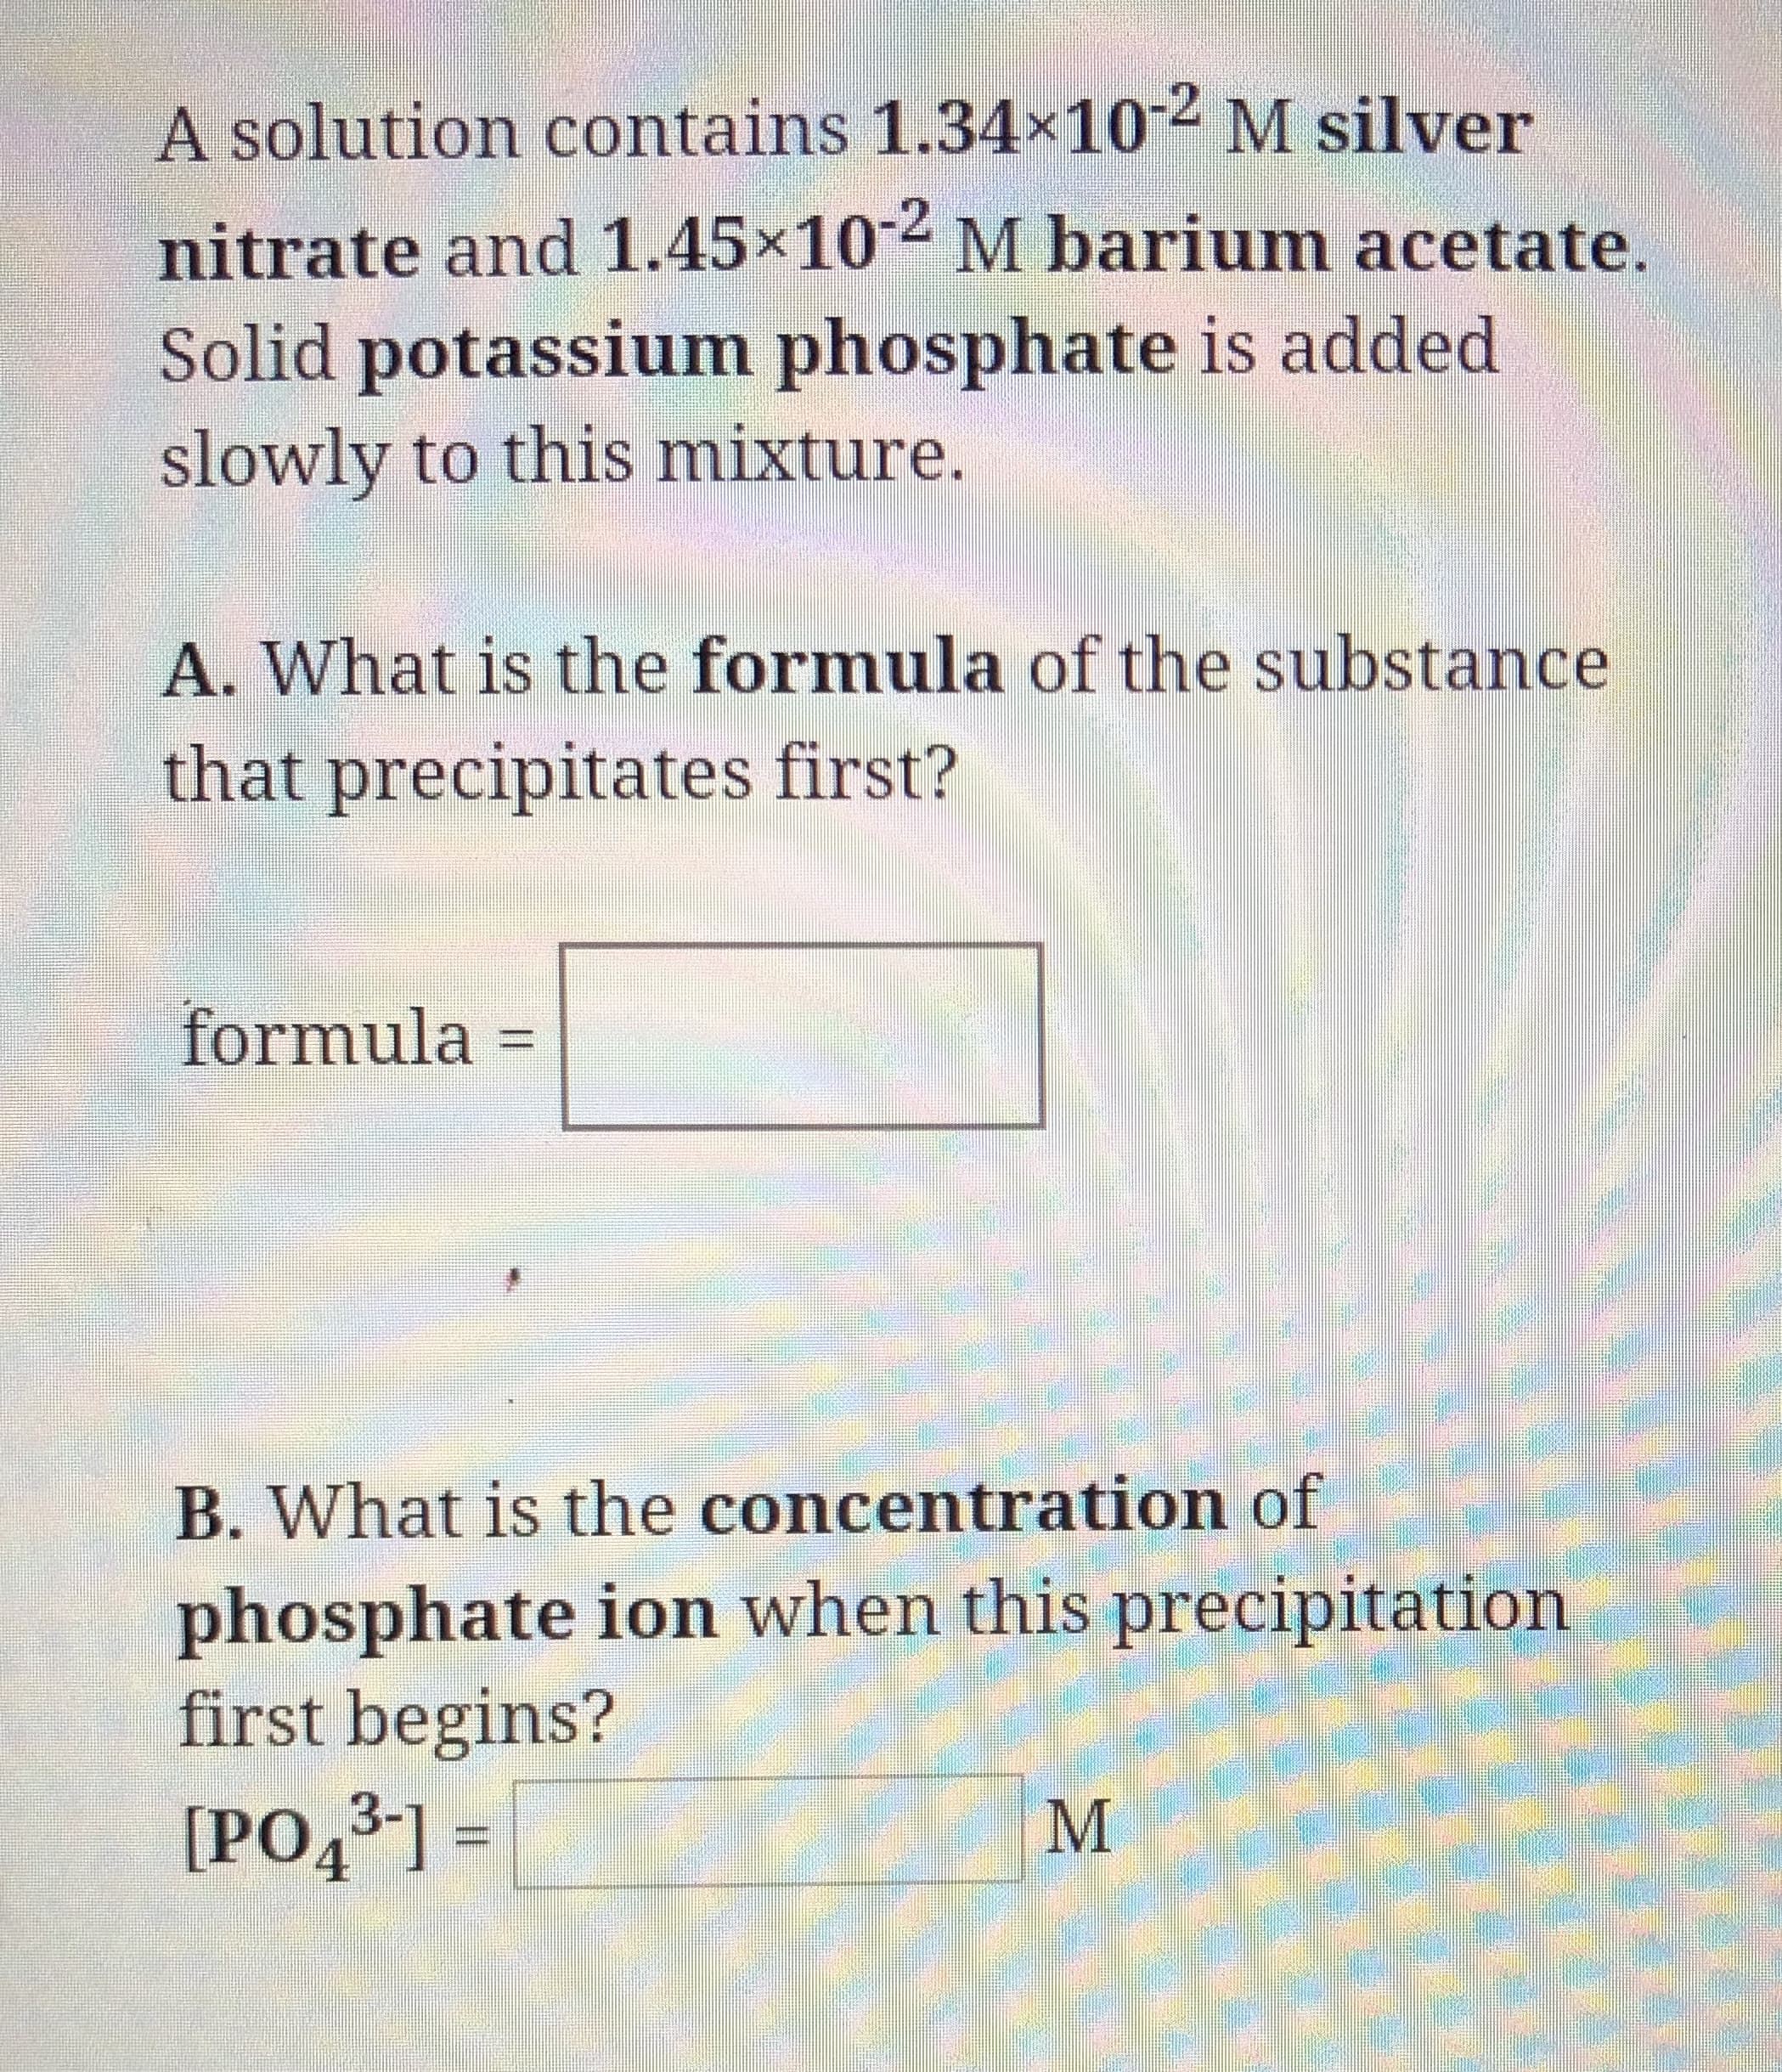 A solution contains 1.34x102 M silver
nitrate and 1.45x10
M barium acetate.
Solid potassium phosphate is added
slowly to this mixture.
A. What is the formula of the substance
that precipitates first?
formula
B. What is the concentration of
phosphate ion when this precipitation
first begins?
[PO431=
М
